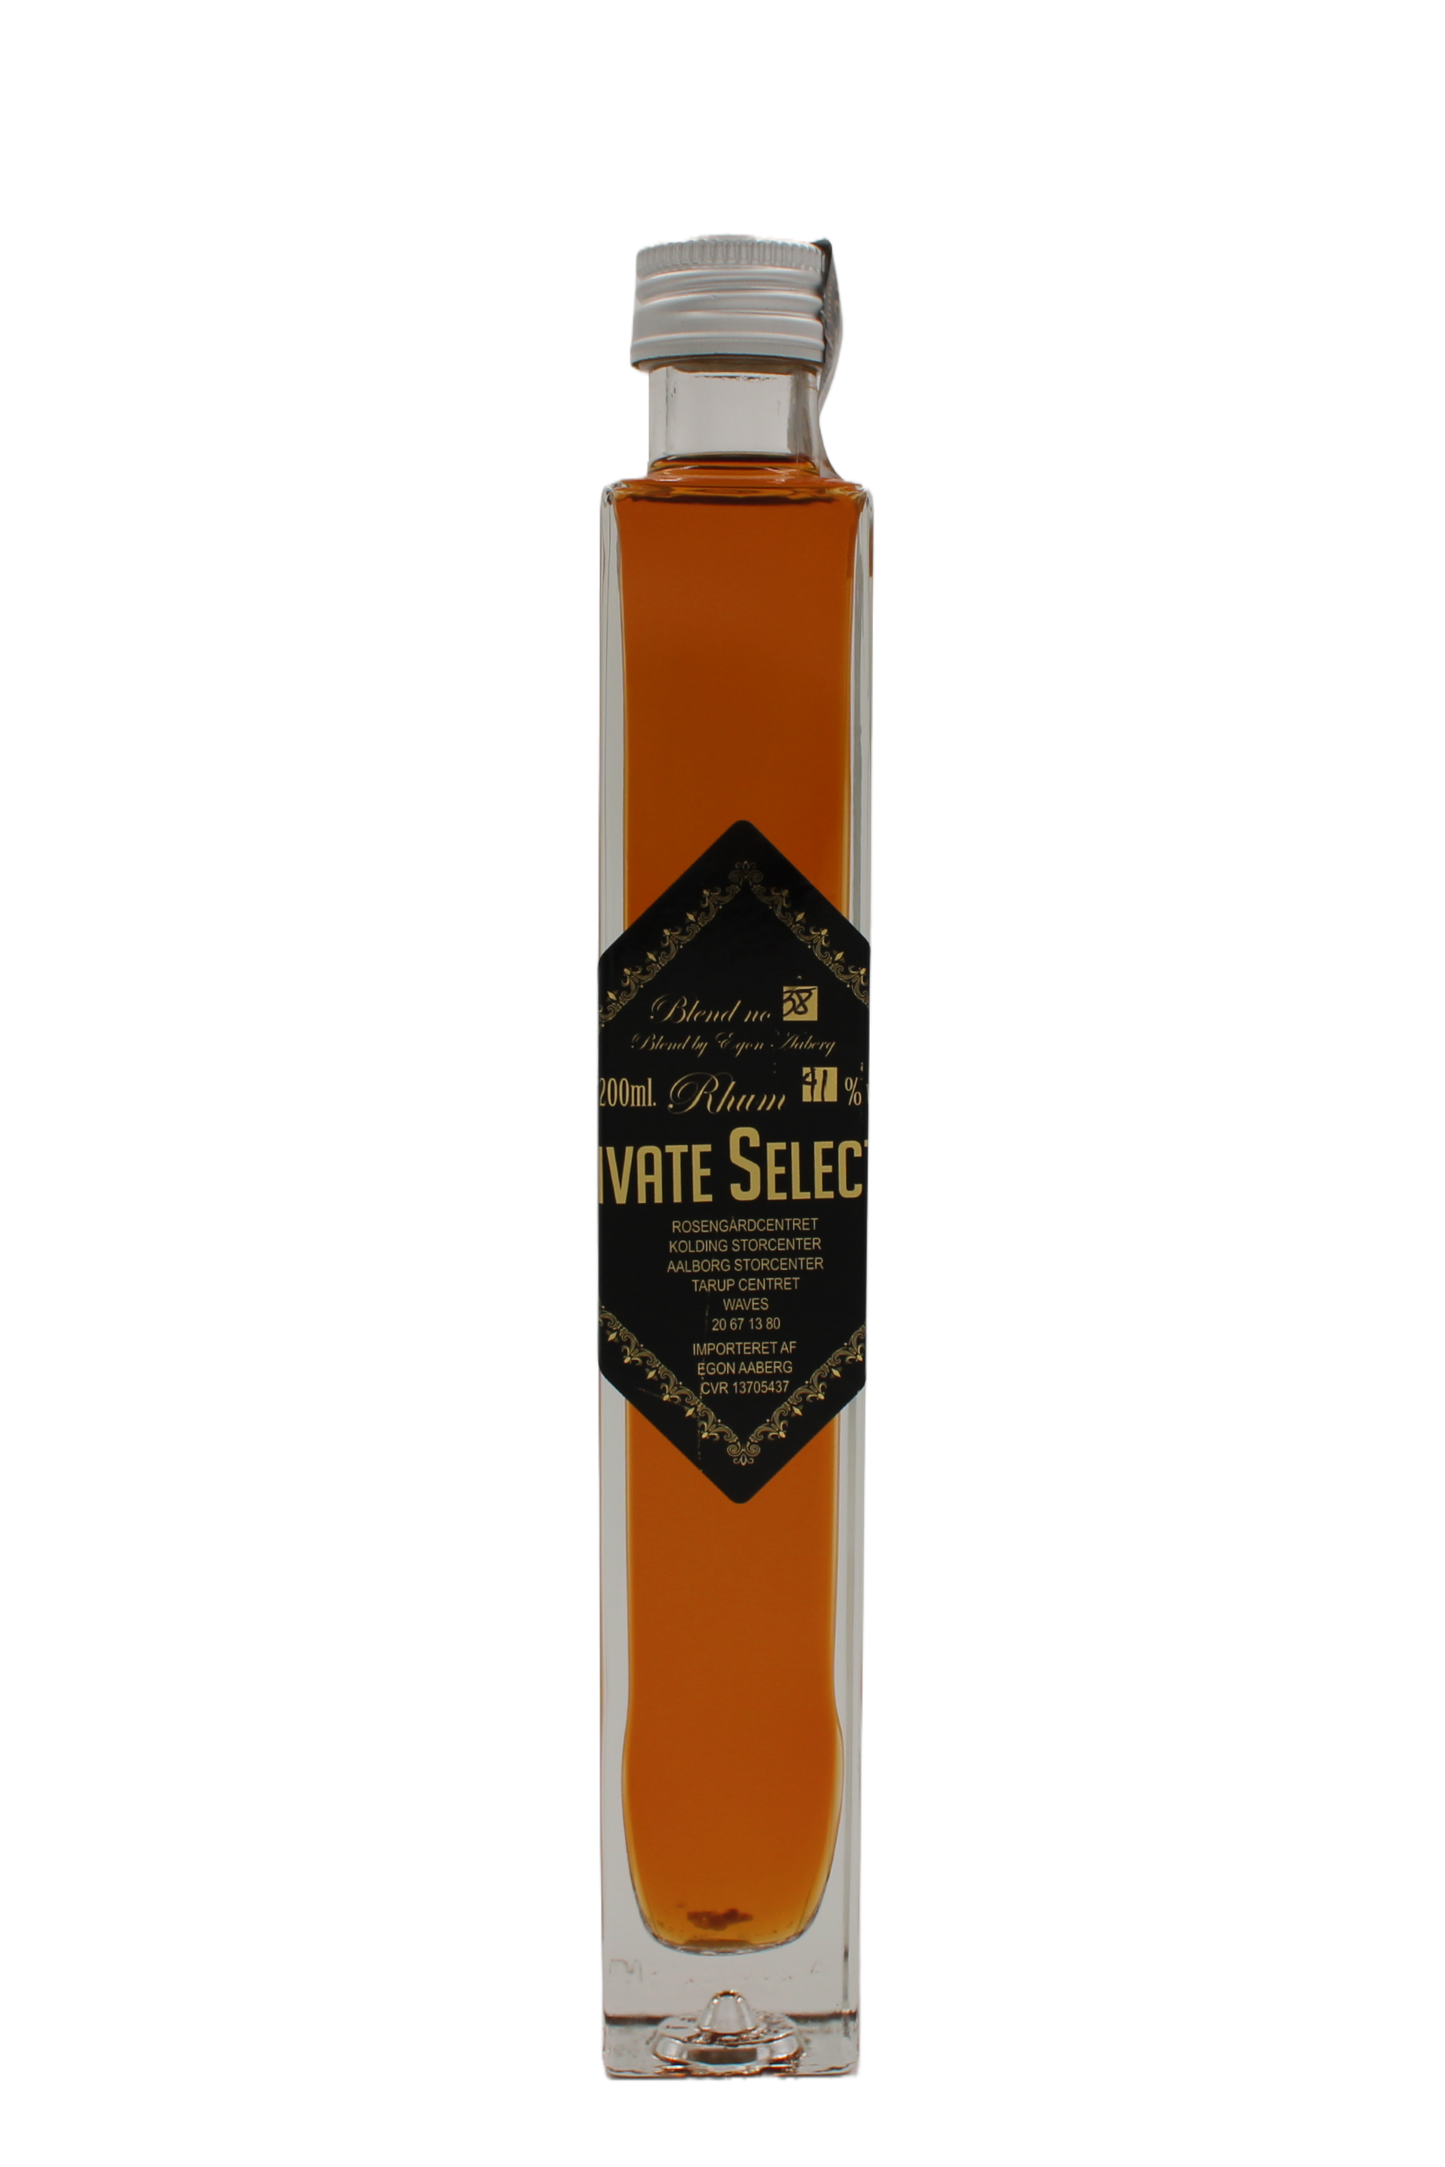 Private Selection - Blend no. 38 200ml